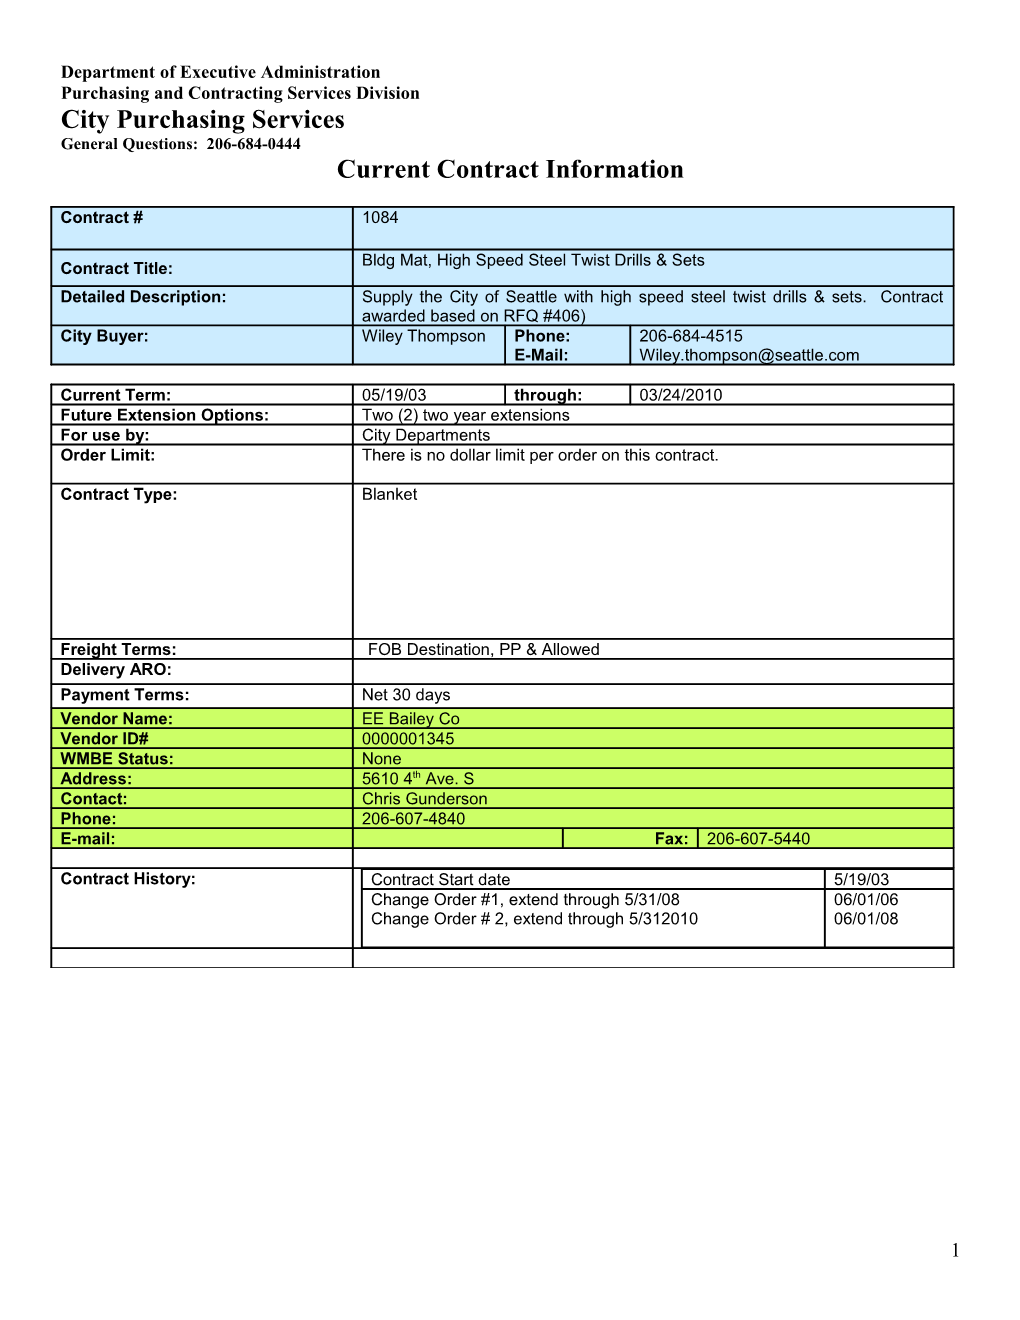 Current Contract Information Form s18